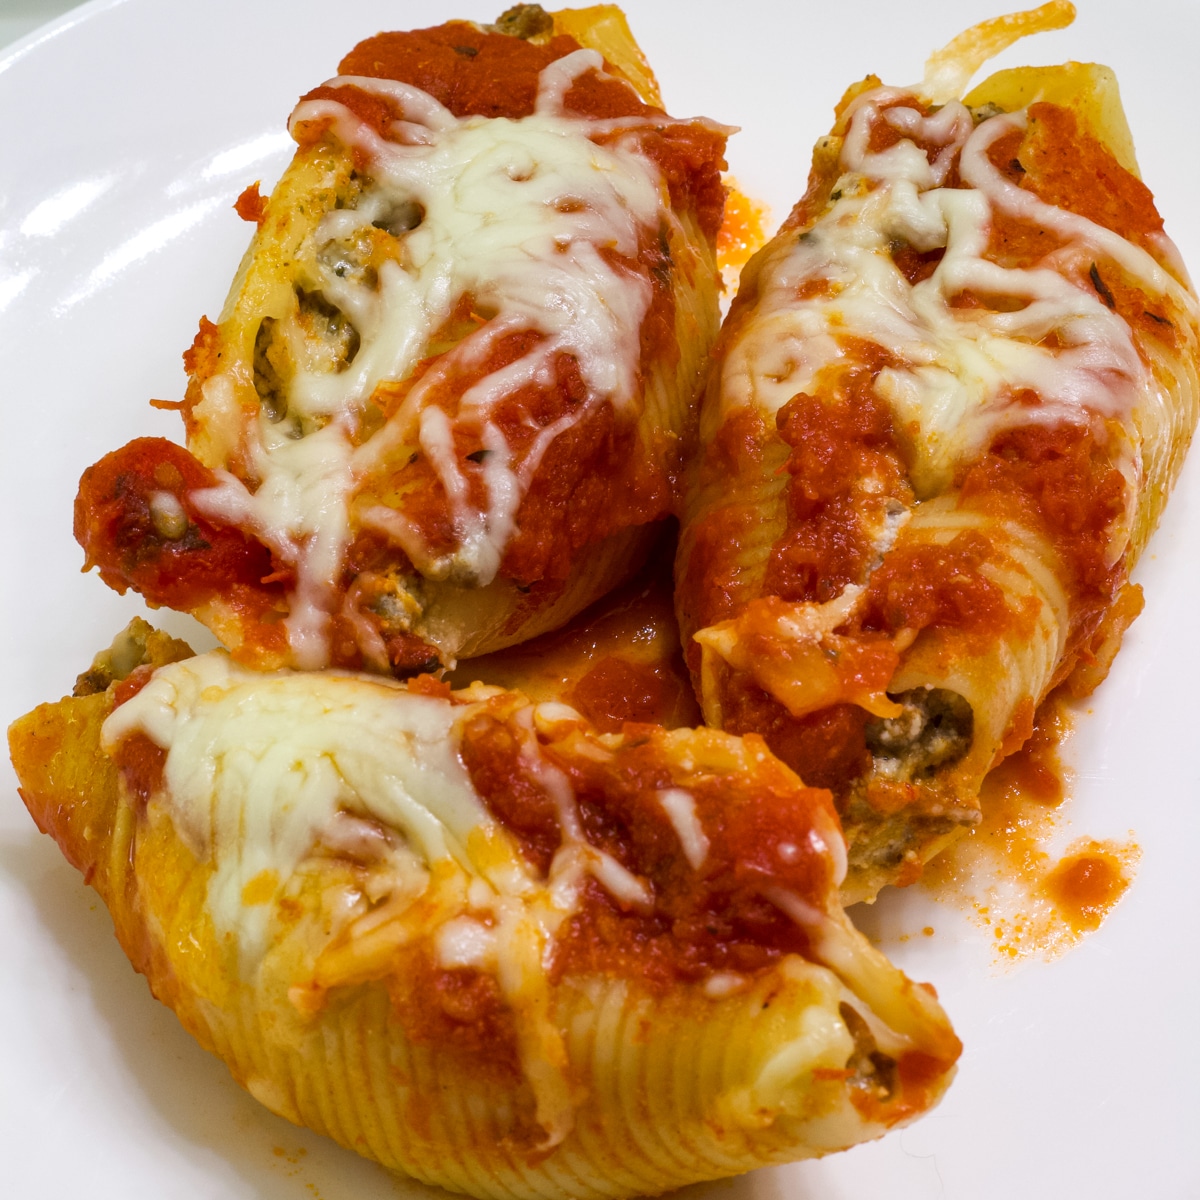 The Best Ground Beef Stuffed Pasta Shells Recipe - Mindy's Cooking